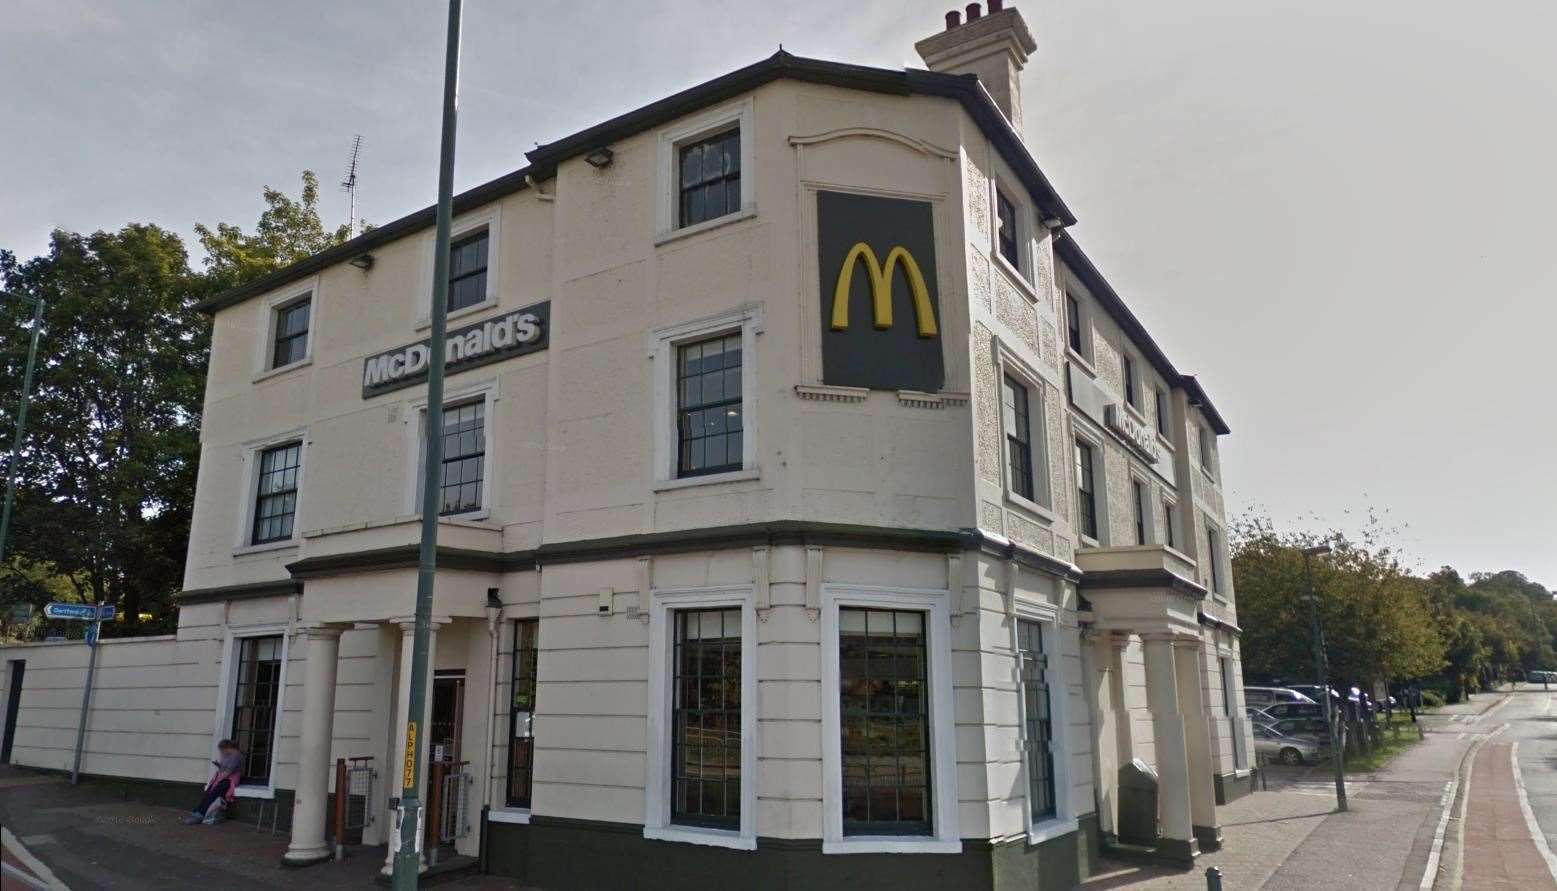 The Railway Tavern, now a McDonalds where Simon was abandoned as a baby